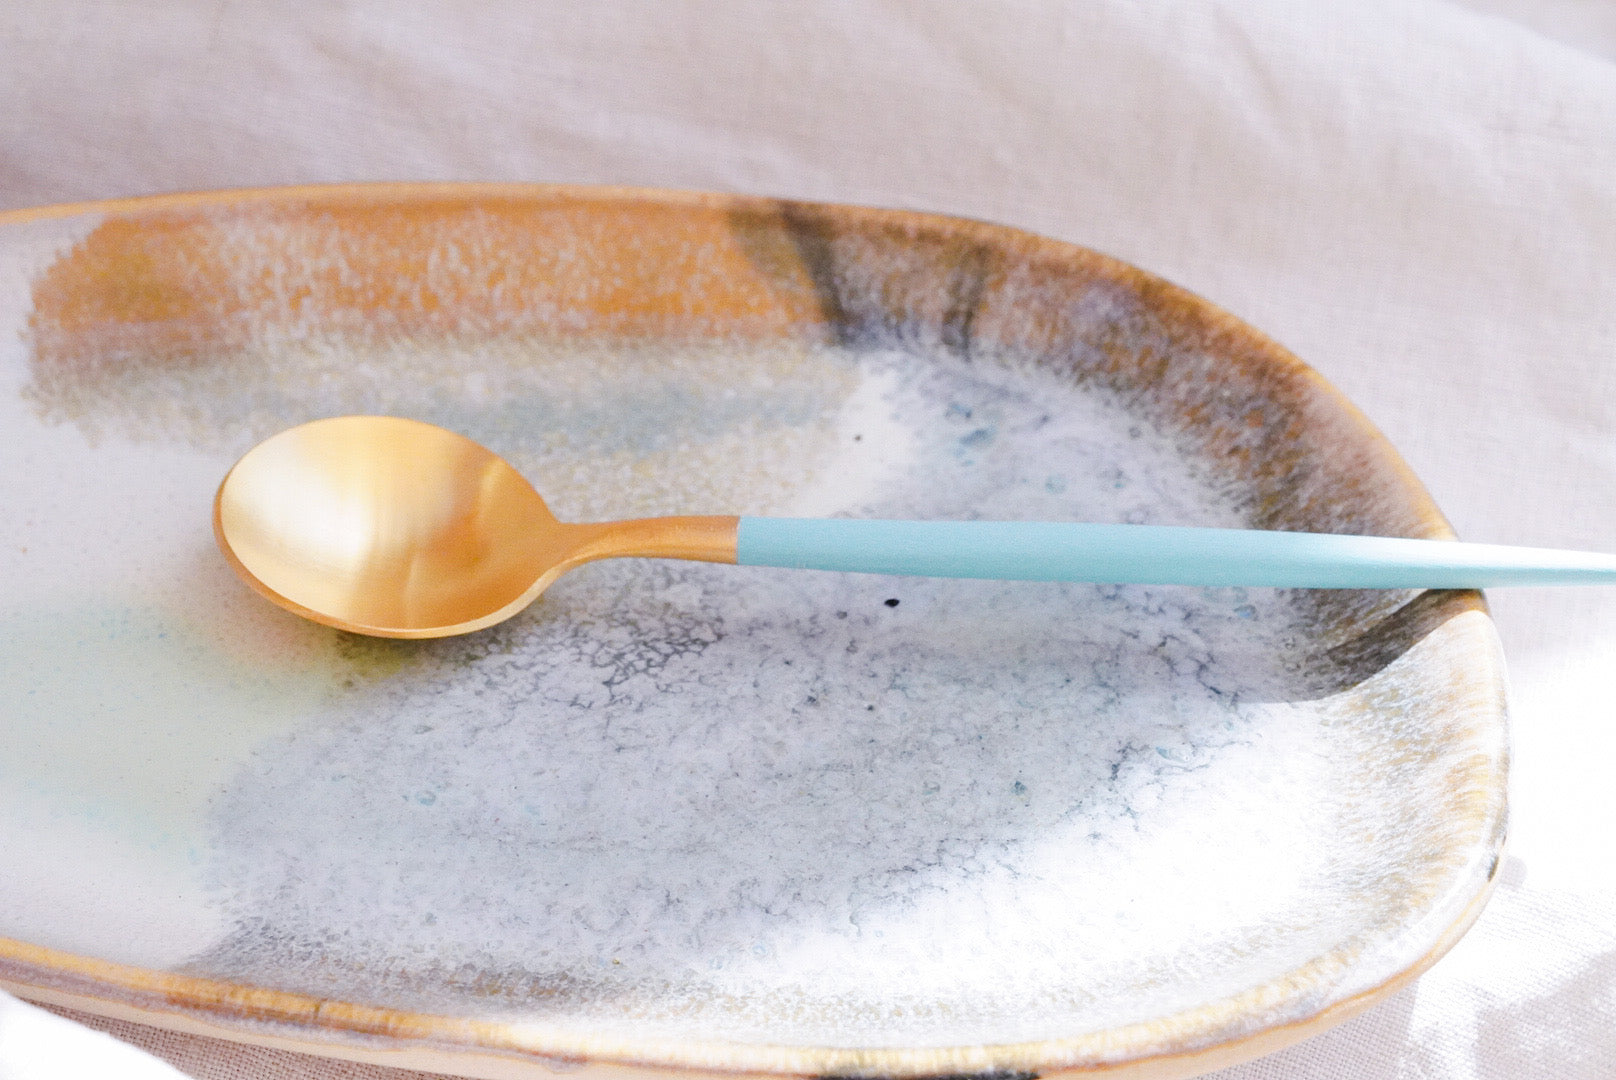 Golden Spoon Turquoise blue